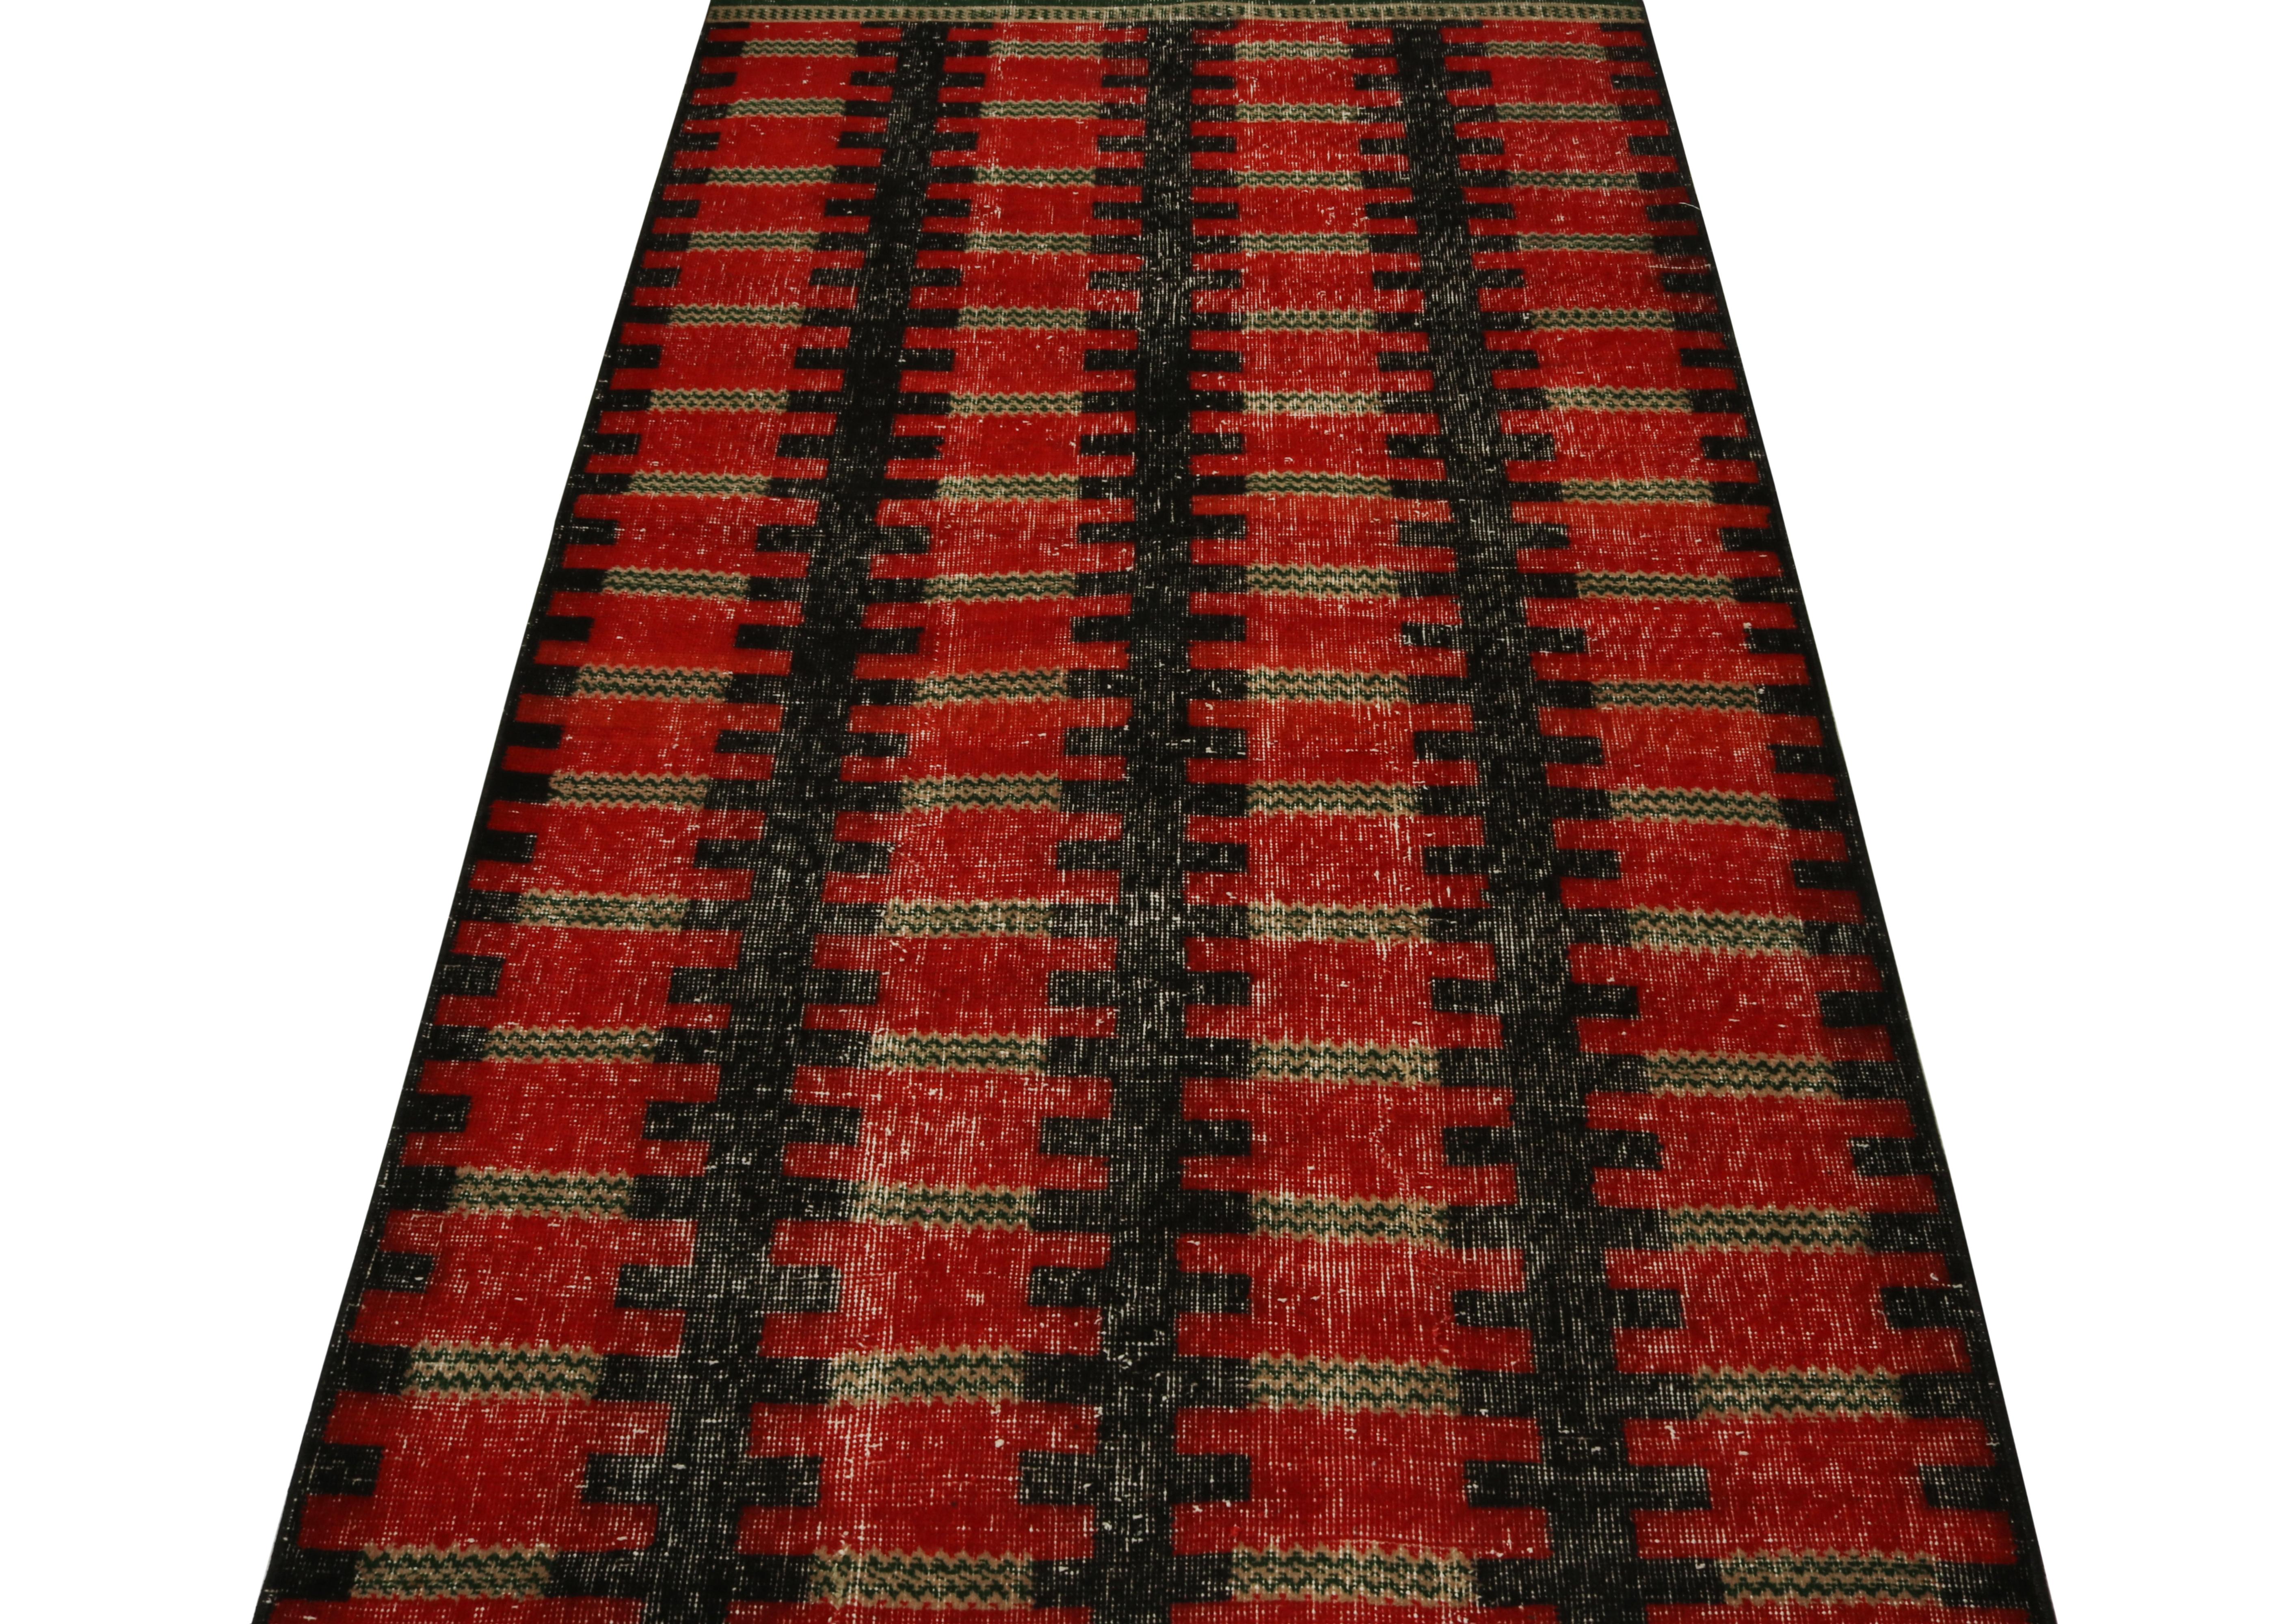 This vintage 4x6 rug is a new addition to Rug & Kilim’s Mid-Century Pasha Collection. This line is a commemoration, with rare curations we believe to hail from multidisciplinary Turkish designer Zeki Müren.

Further on the Design:

This industrial